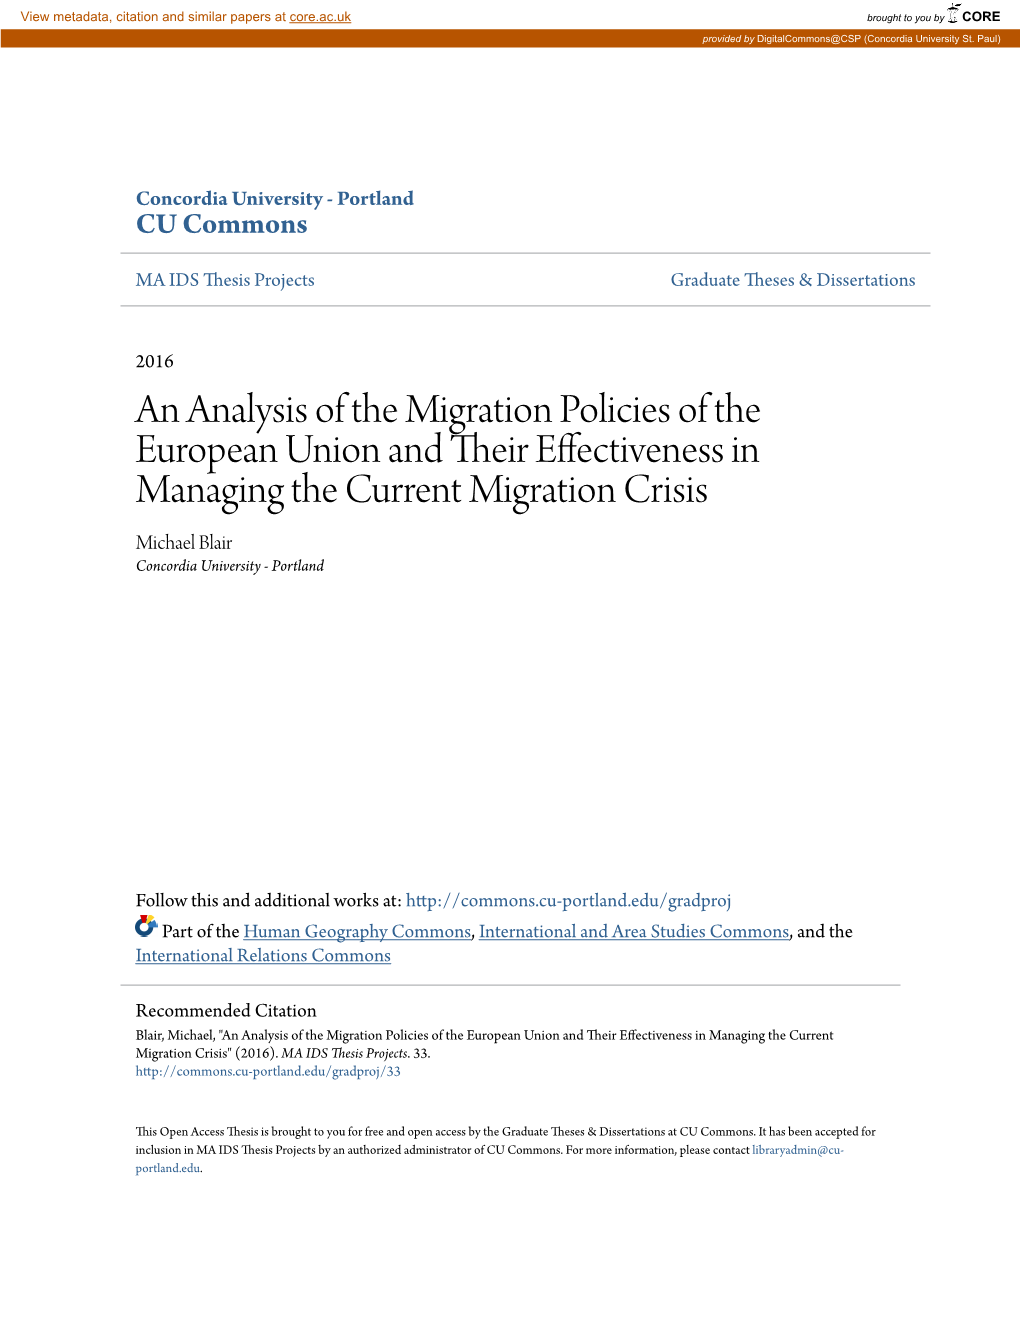 An Analysis of the Migration Policies of the European Union and Their